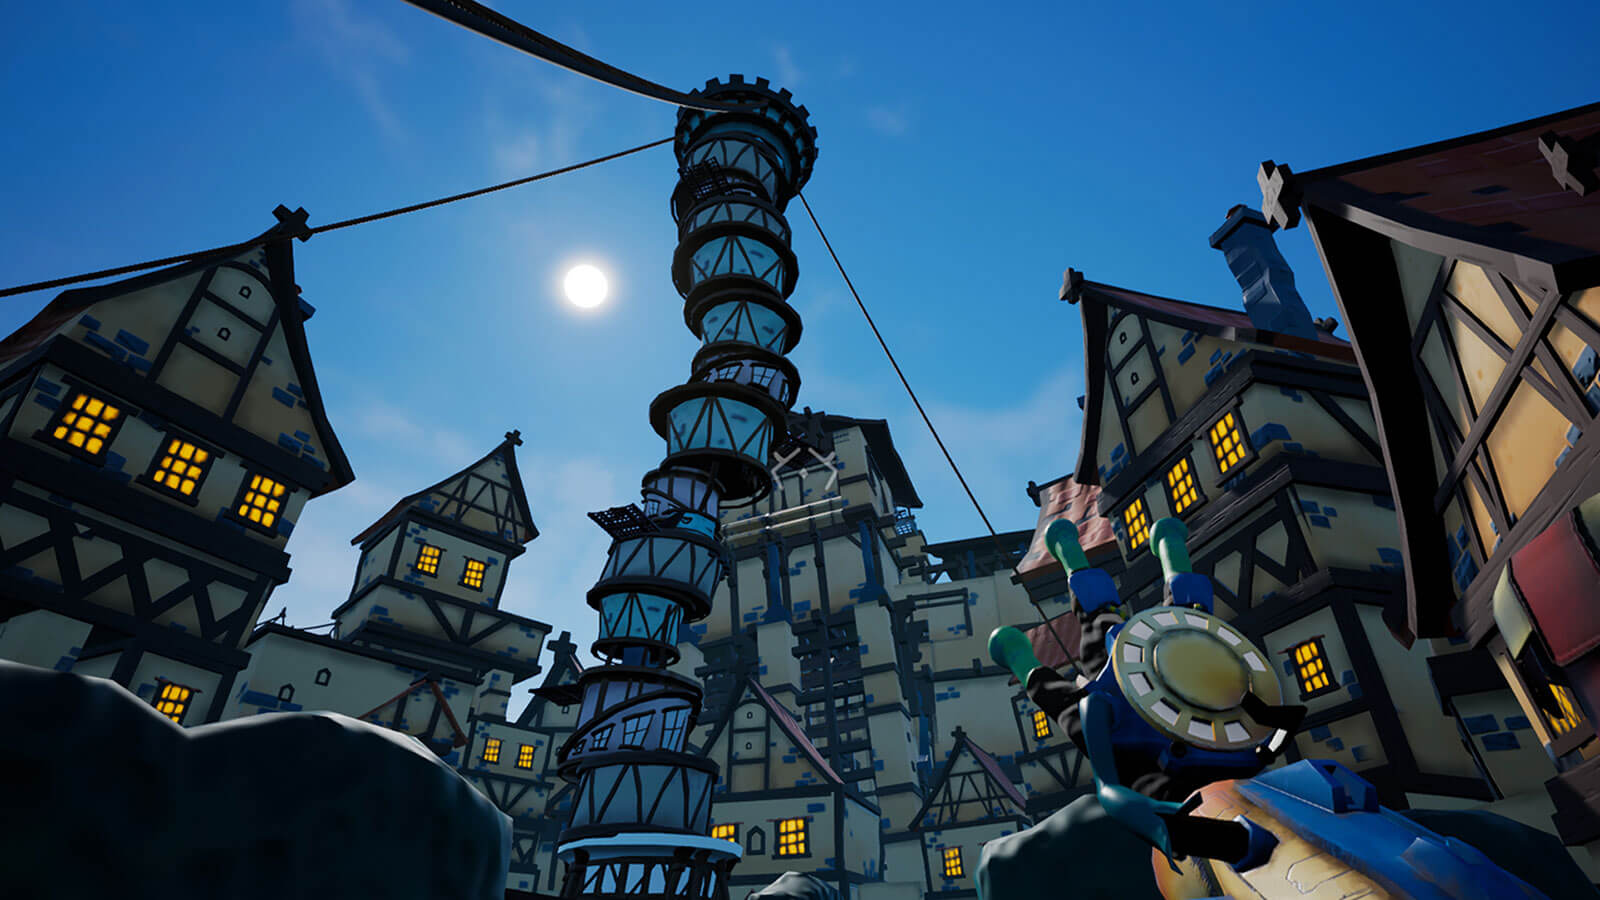 Player looks up at massive oddly stacked tower in a town square